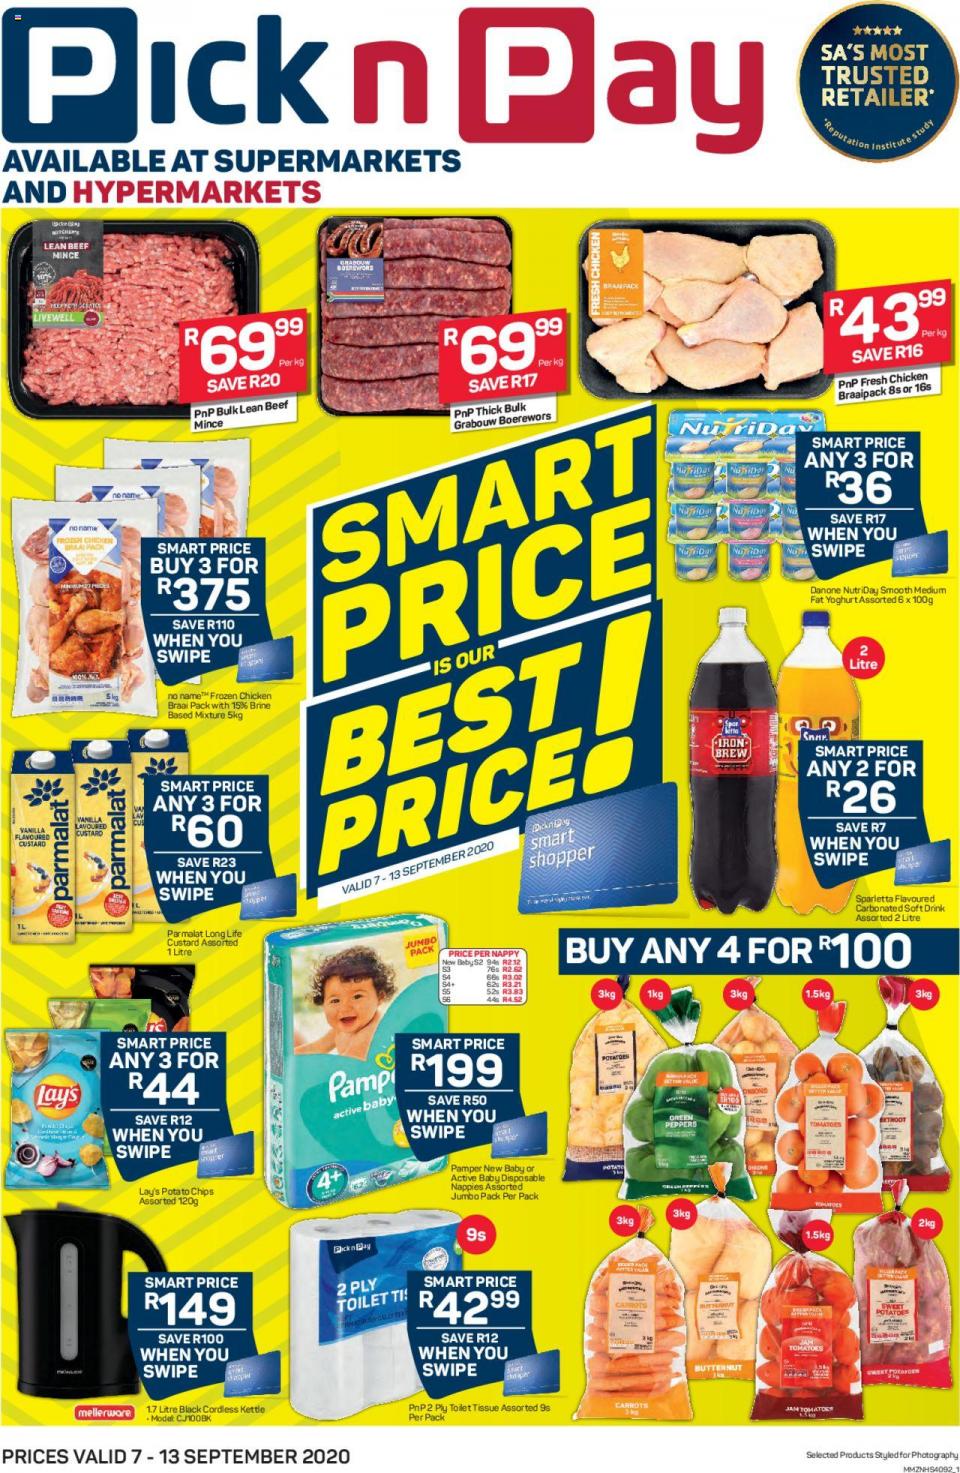 pnp-catalogue-pick-n-pay-catalogue-pnp-specials-pick-n-pay-special